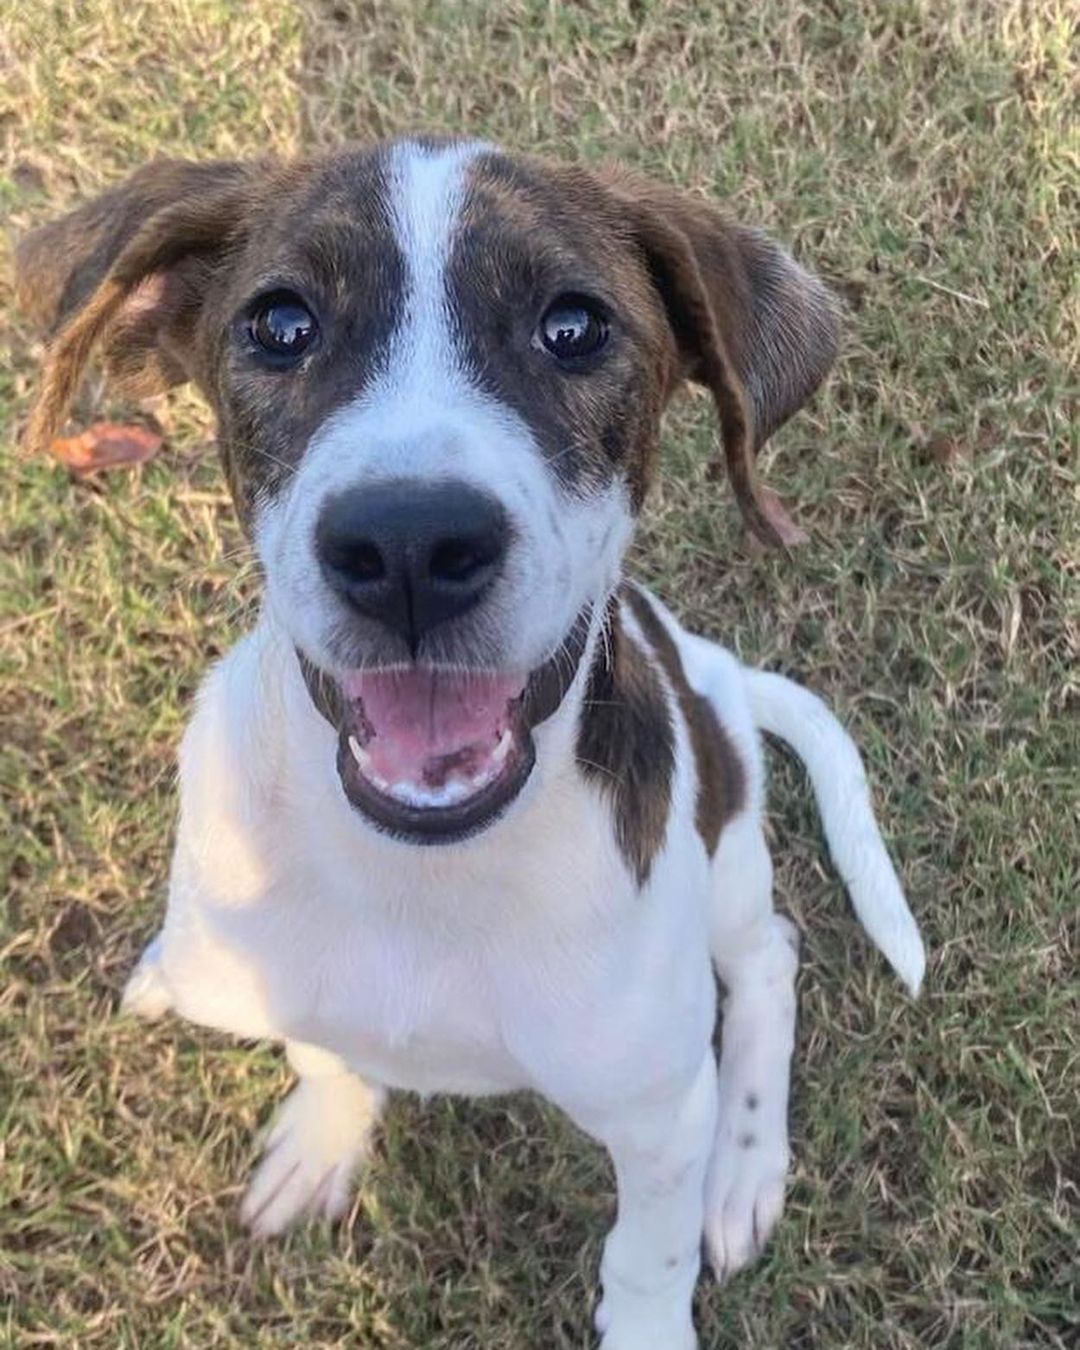 Meet ℂℍ𝔼ℝ💖
She is a Hound mix, approx 5-6 months old, has received all age appropriate vaccines, good with other dogs, has not been cat tested. Please use <a target='_blank' href='https://www.instagram.com/explore/tags/linkinbio/'>#linkinbio</a> to apply today.
.
 <a target='_blank' href='https://www.instagram.com/explore/tags/rescuedog/'>#rescuedog</a> <a target='_blank' href='https://www.instagram.com/explore/tags/dogsofinstagram/'>#dogsofinstagram</a> <a target='_blank' href='https://www.instagram.com/explore/tags/adoptdontshop/'>#adoptdontshop</a> <a target='_blank' href='https://www.instagram.com/explore/tags/adopt/'>#adopt</a> <a target='_blank' href='https://www.instagram.com/explore/tags/adoption/'>#adoption</a> <a target='_blank' href='https://www.instagram.com/explore/tags/rescuedogsofinstagram/'>#rescuedogsofinstagram</a> <a target='_blank' href='https://www.instagram.com/explore/tags/dog/'>#dog</a> <a target='_blank' href='https://www.instagram.com/explore/tags/dogs/'>#dogs</a> <a target='_blank' href='https://www.instagram.com/explore/tags/rescue/'>#rescue</a> <a target='_blank' href='https://www.instagram.com/explore/tags/instadog/'>#instadog</a> <a target='_blank' href='https://www.instagram.com/explore/tags/dogoftheday/'>#dogoftheday</a> <a target='_blank' href='https://www.instagram.com/explore/tags/rescuedogs/'>#rescuedogs</a> <a target='_blank' href='https://www.instagram.com/explore/tags/savinglives/'>#savinglives</a> <a target='_blank' href='https://www.instagram.com/explore/tags/rescuedismyfavoritebreed/'>#rescuedismyfavoritebreed</a> <a target='_blank' href='https://www.instagram.com/explore/tags/dogsofinsta/'>#dogsofinsta</a> <a target='_blank' href='https://www.instagram.com/explore/tags/doglovers/'>#doglovers</a> <a target='_blank' href='https://www.instagram.com/explore/tags/doggo/'>#doggo</a> <a target='_blank' href='https://www.instagram.com/explore/tags/muttsofinstagram/'>#muttsofinstagram</a> <a target='_blank' href='https://www.instagram.com/explore/tags/happydog/'>#happydog</a> <a target='_blank' href='https://www.instagram.com/explore/tags/puppiesofinstagram/'>#puppiesofinstagram</a> <a target='_blank' href='https://www.instagram.com/explore/tags/ilovemydog/'>#ilovemydog</a> <a target='_blank' href='https://www.instagram.com/explore/tags/hhar/'>#hhar</a> <a target='_blank' href='https://www.instagram.com/explore/tags/harveyshopeanimalrescue/'>#harveyshopeanimalrescue</a> <a target='_blank' href='https://www.instagram.com/explore/tags/donate/'>#donate</a> <a target='_blank' href='https://www.instagram.com/explore/tags/nonprofit/'>#nonprofit</a>